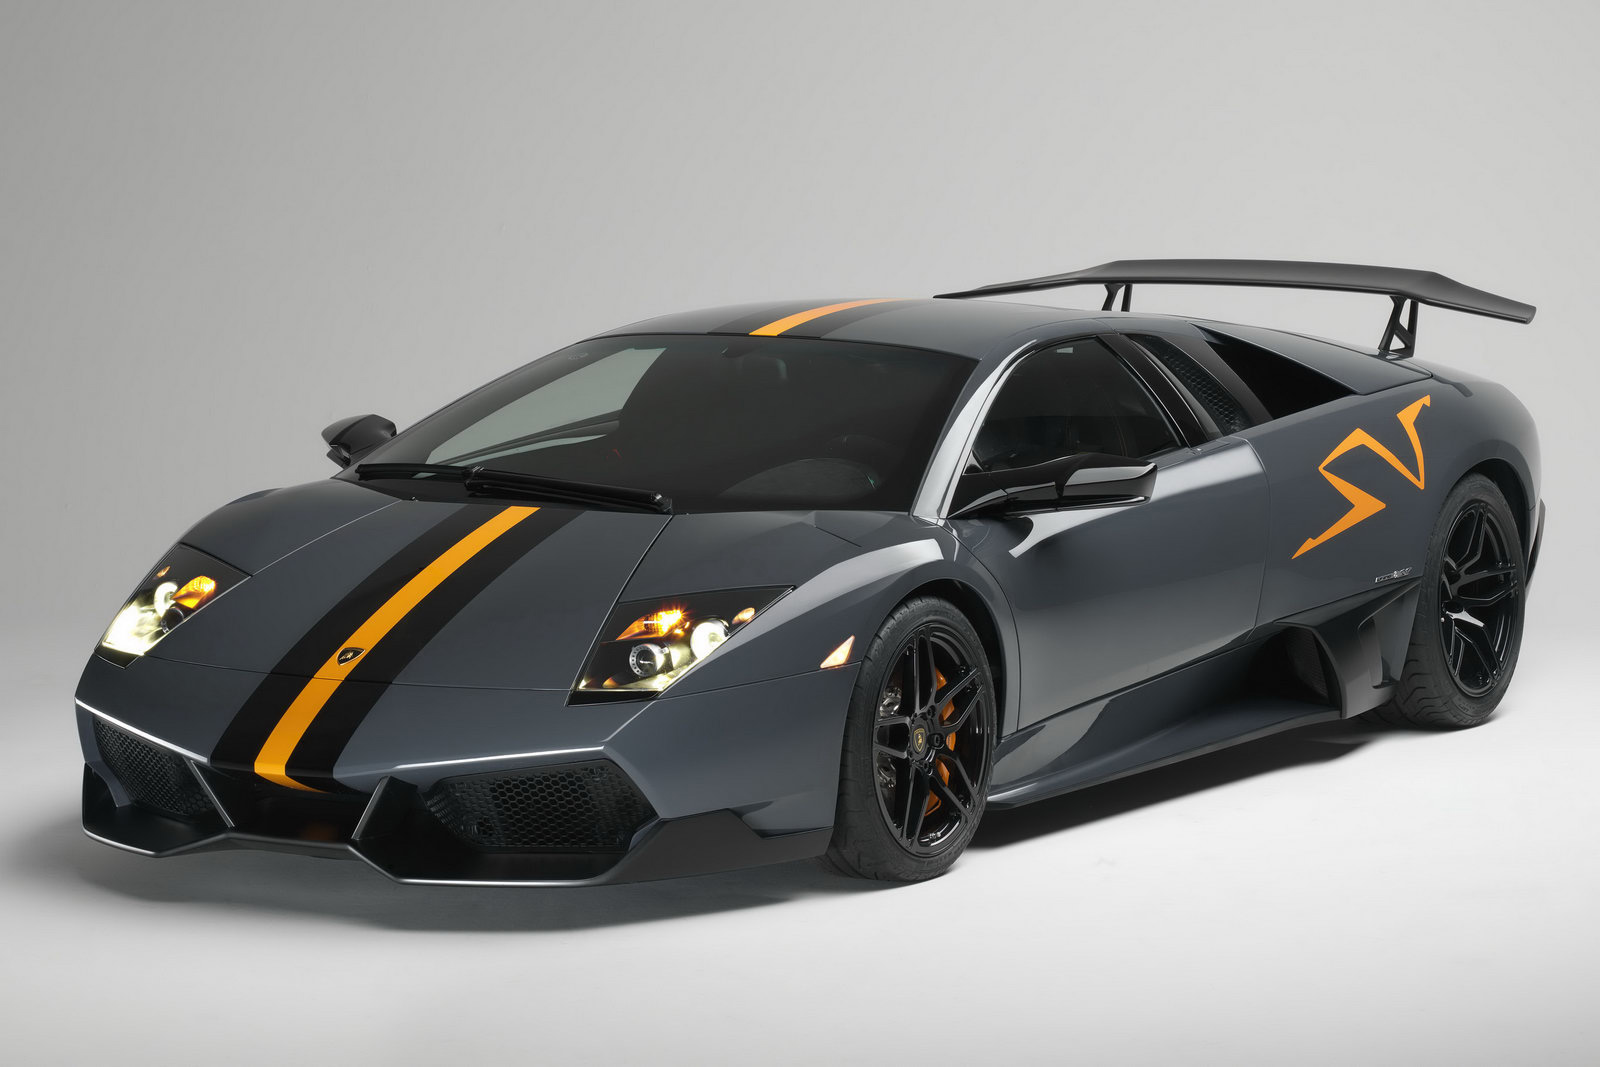 Guinness Book: Top 10 List of the Most Expensive Cars in the World